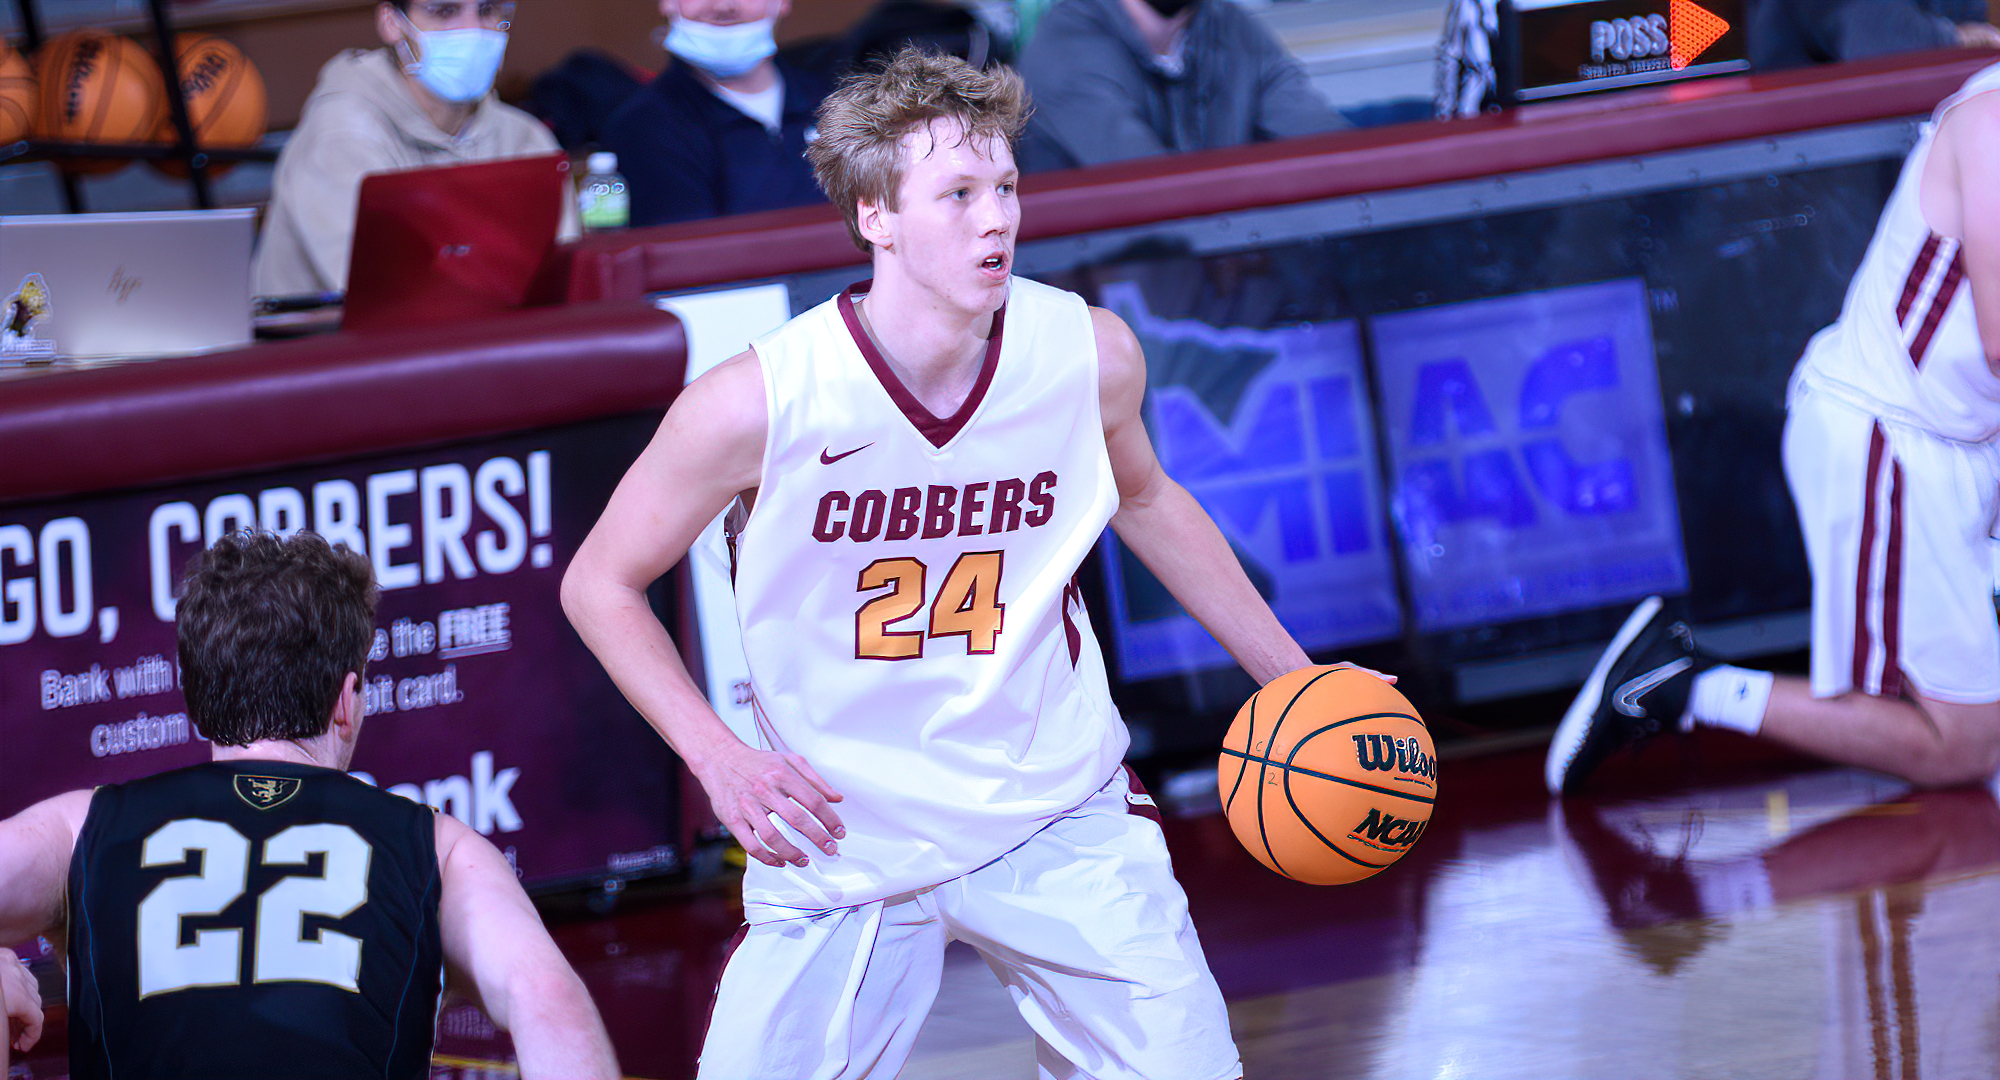 Dylan Inniger scored the most points in a single game by a Cobber freshman in program history against St. Olaf. He  finished with 30 points.